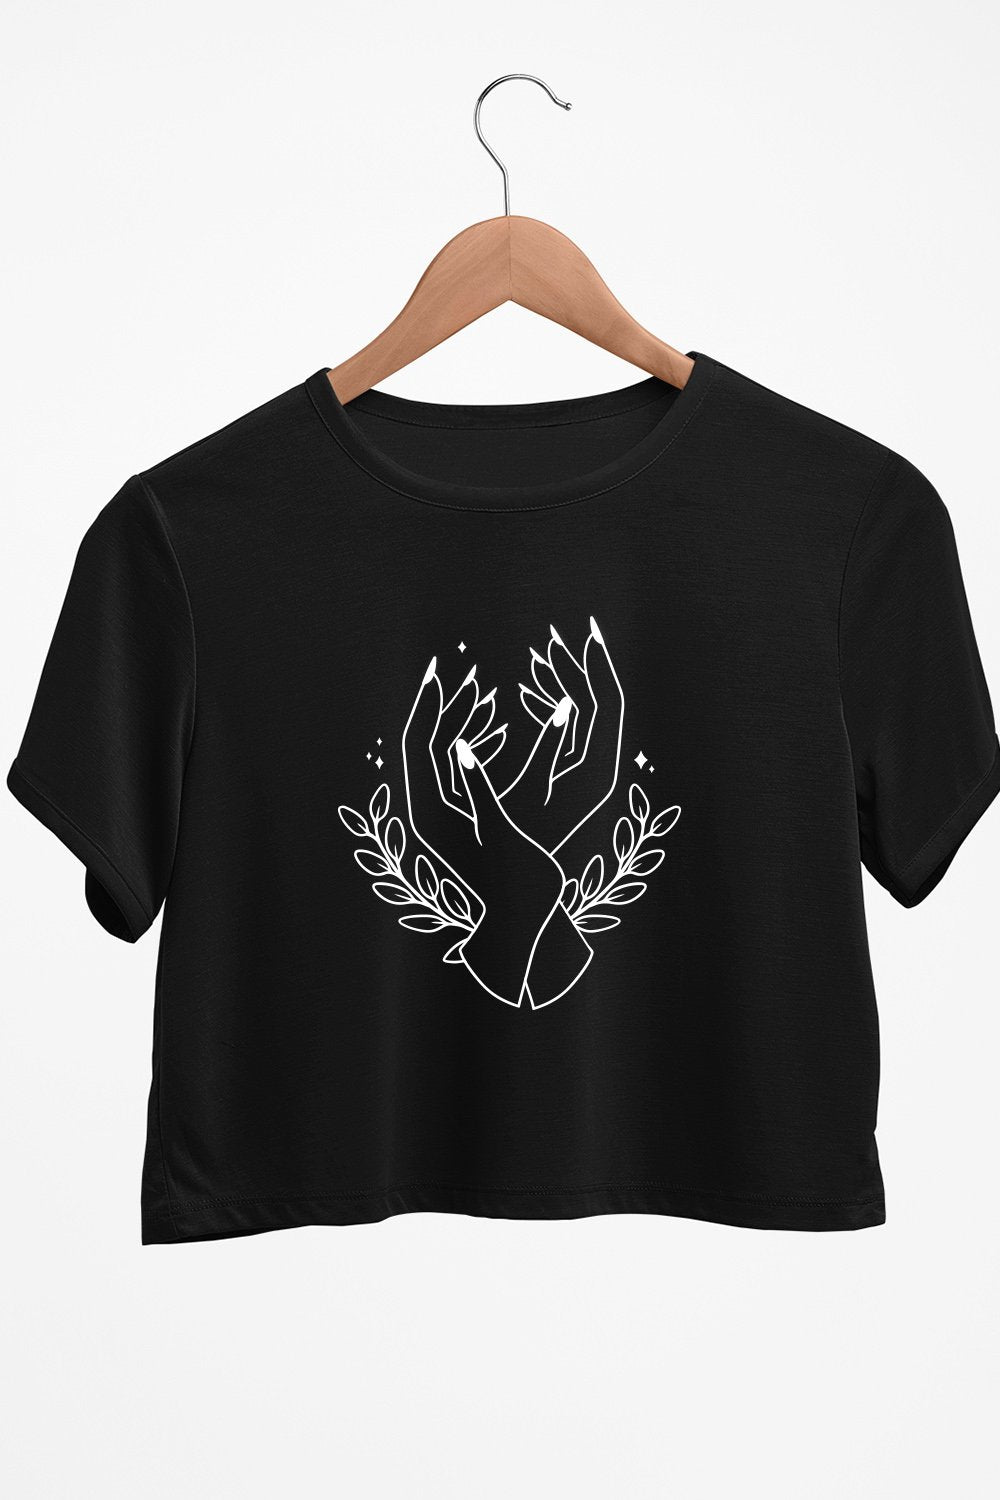 Hands For Peace Graphic Printed Black Crop Top